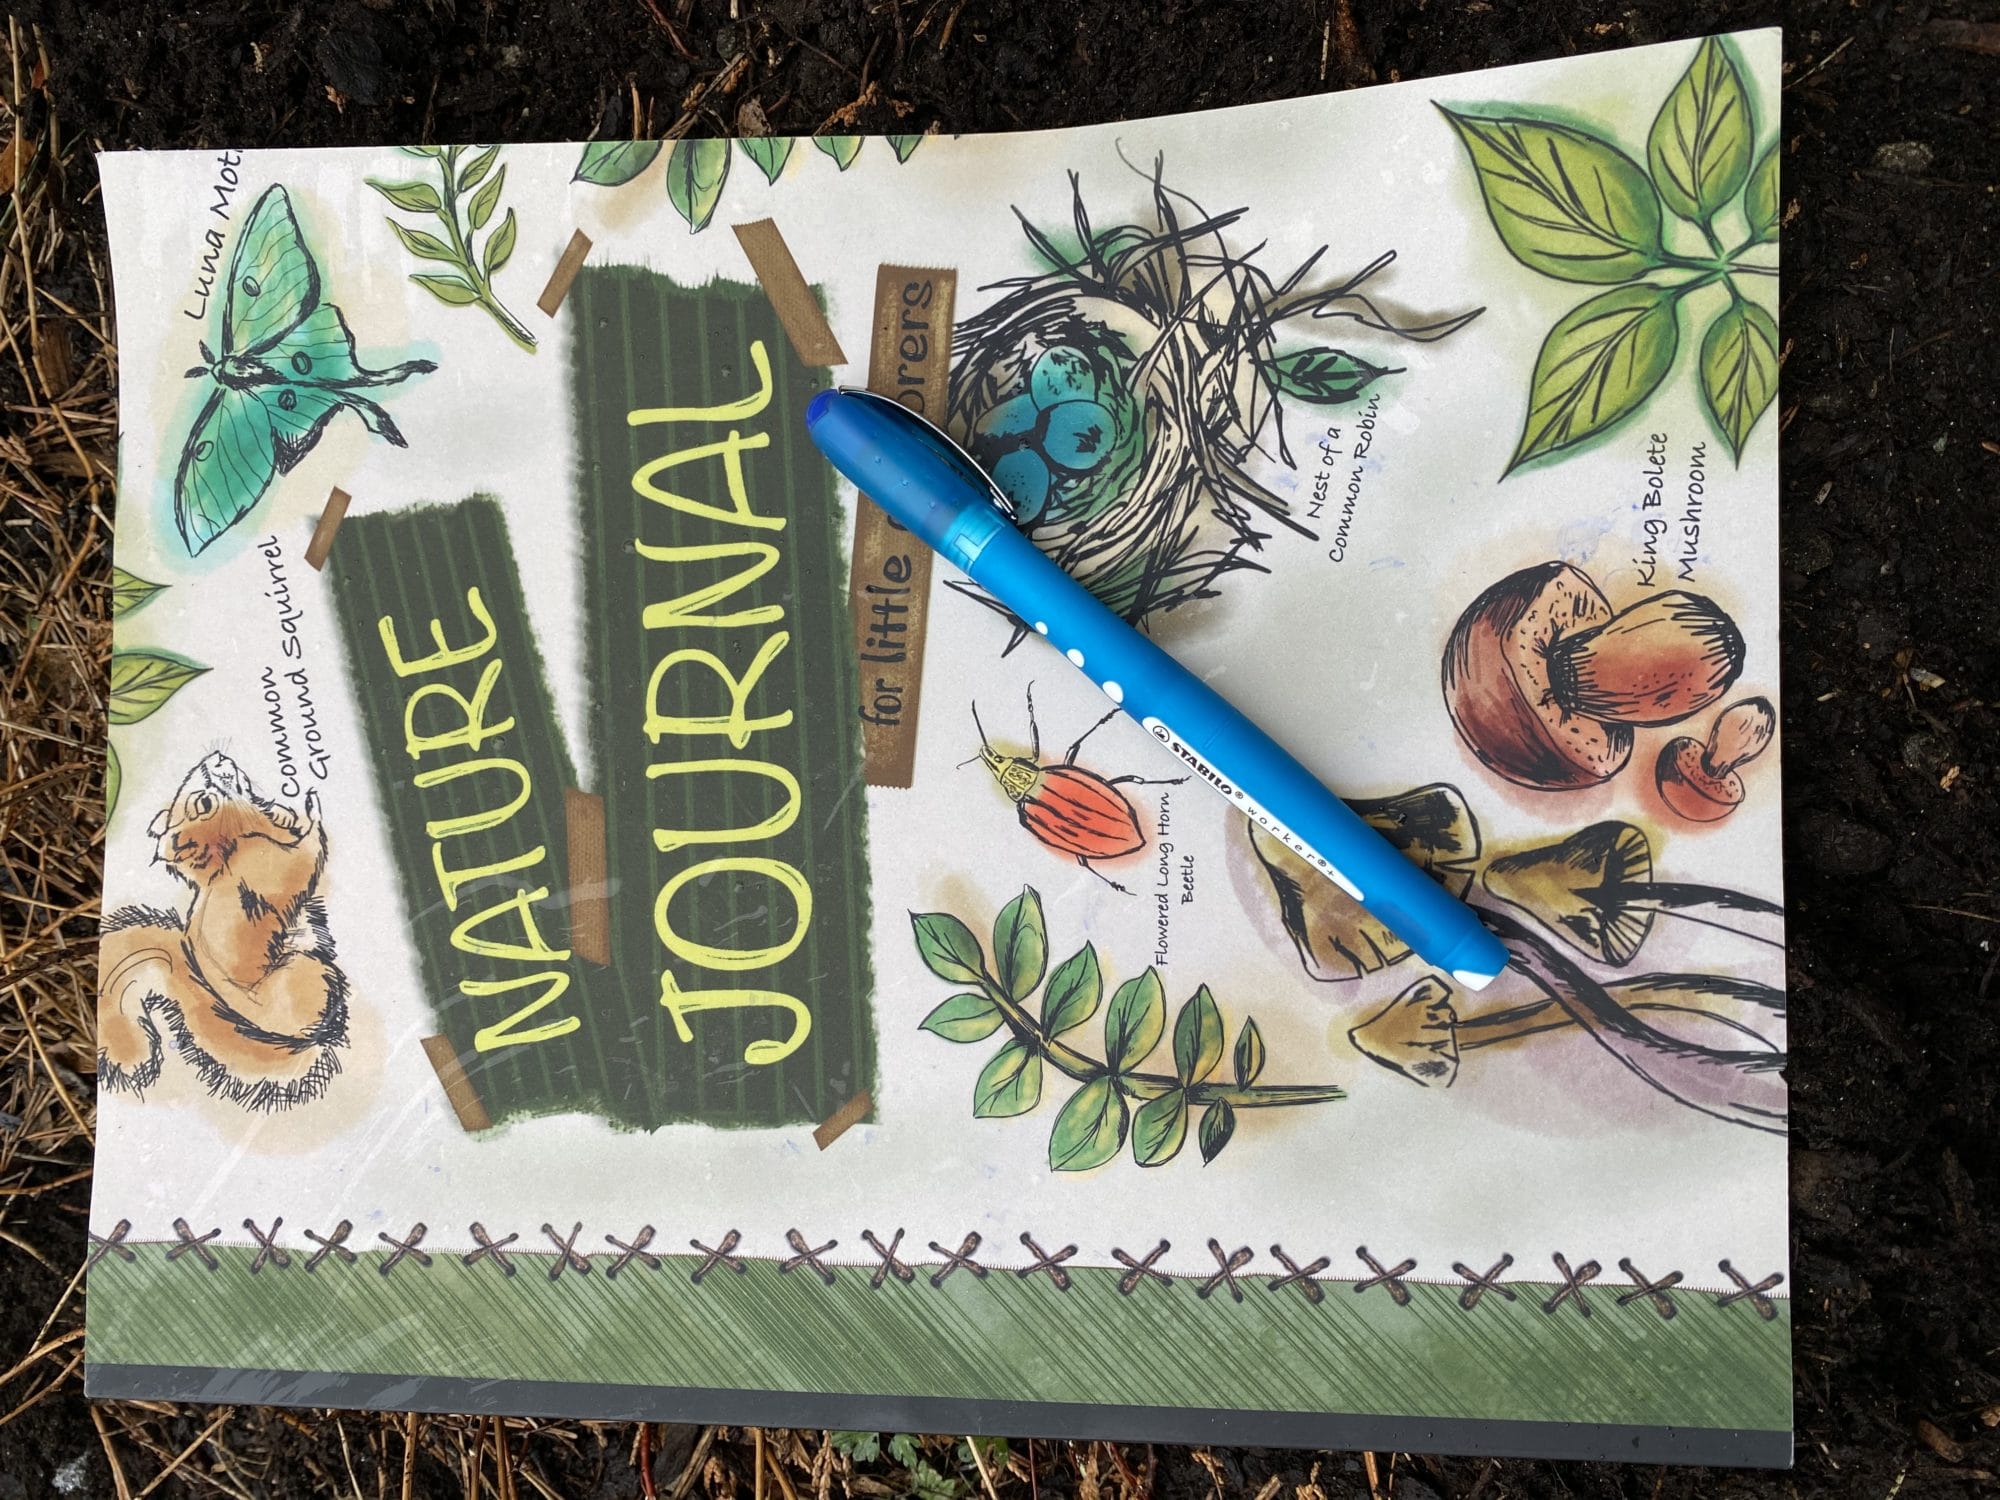 How to Make a Nature Journal for Kids